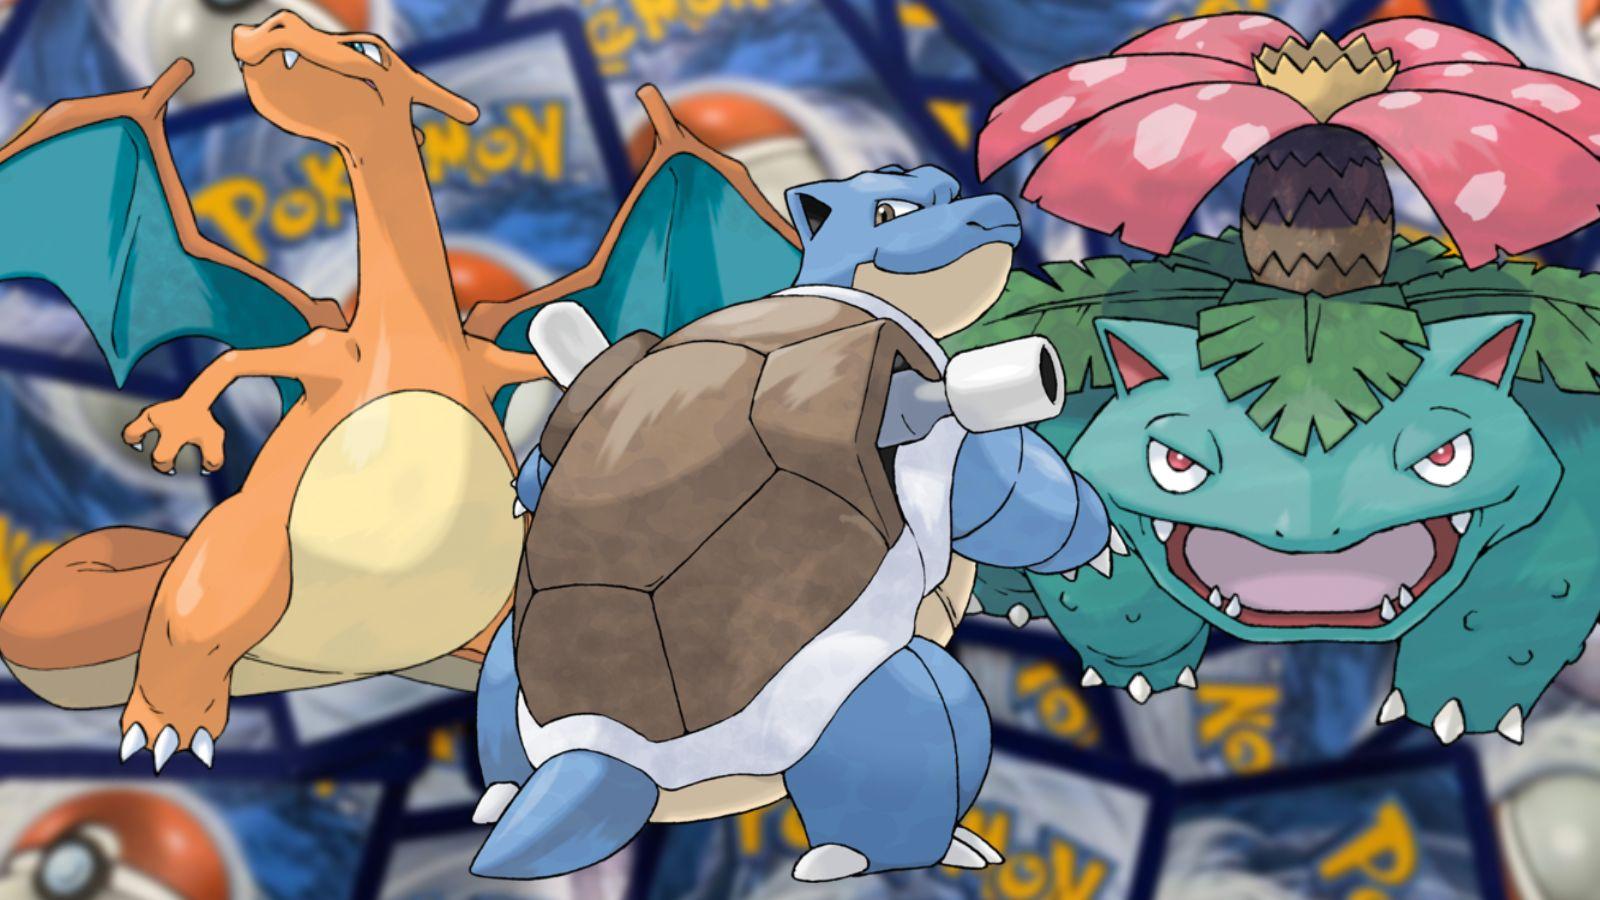 5(ish) Pokémon Cards You Need to Buy Before 151 Releases